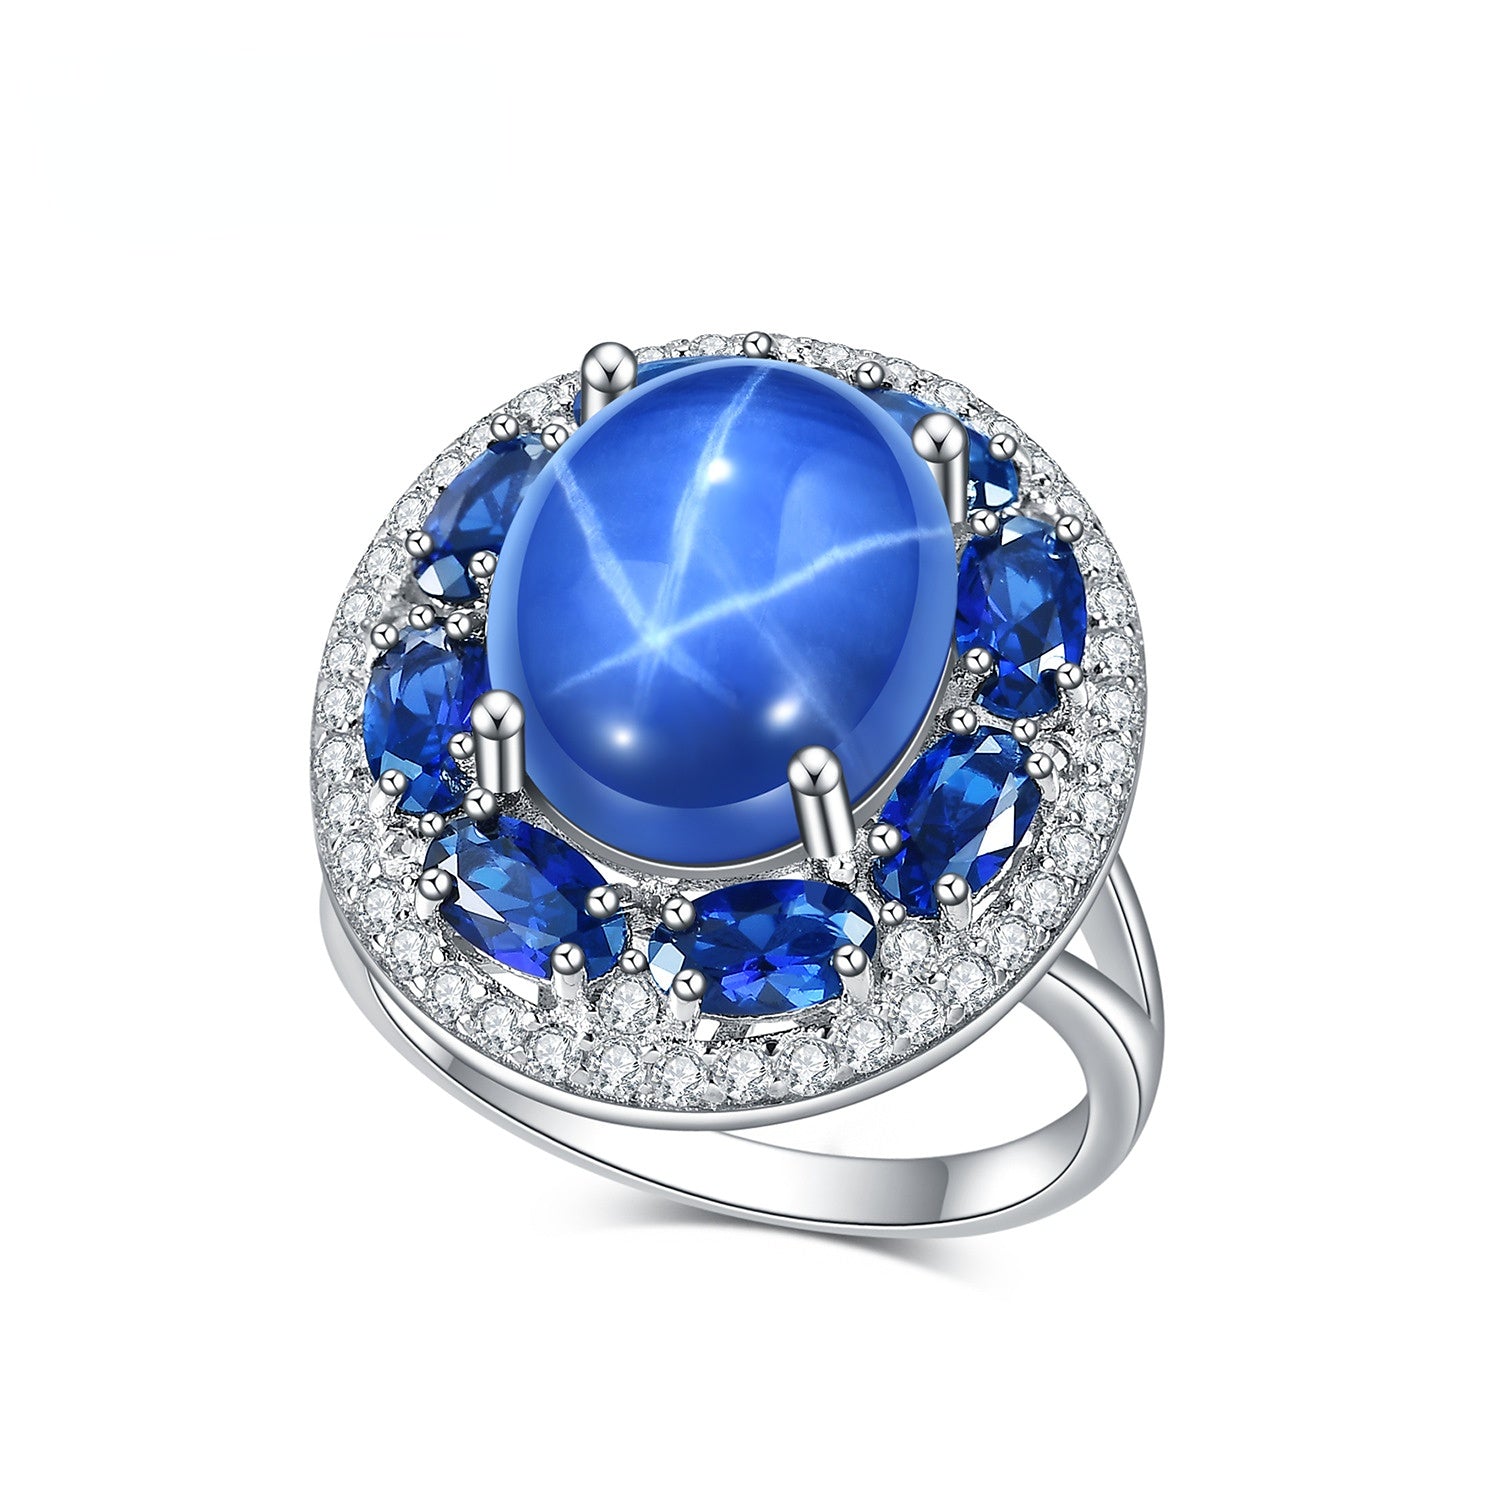 European and American Design Luxury Six Starlight Inlaid Sapphire Soleste Halo Silver Ring for Women